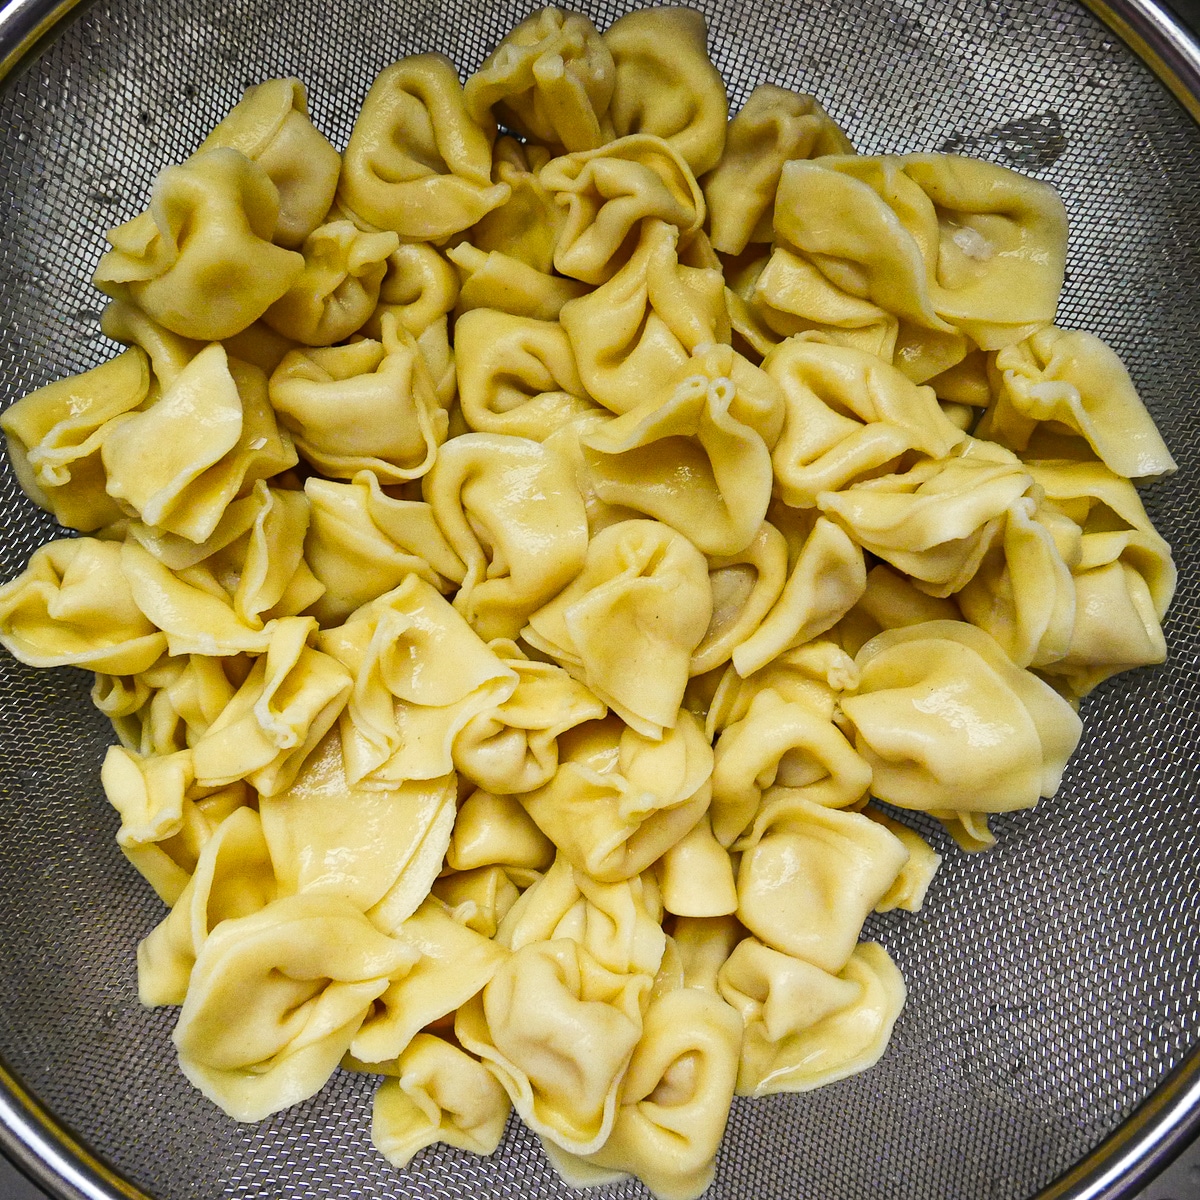 cooked tortellini in a collander after being drained and rinsed.